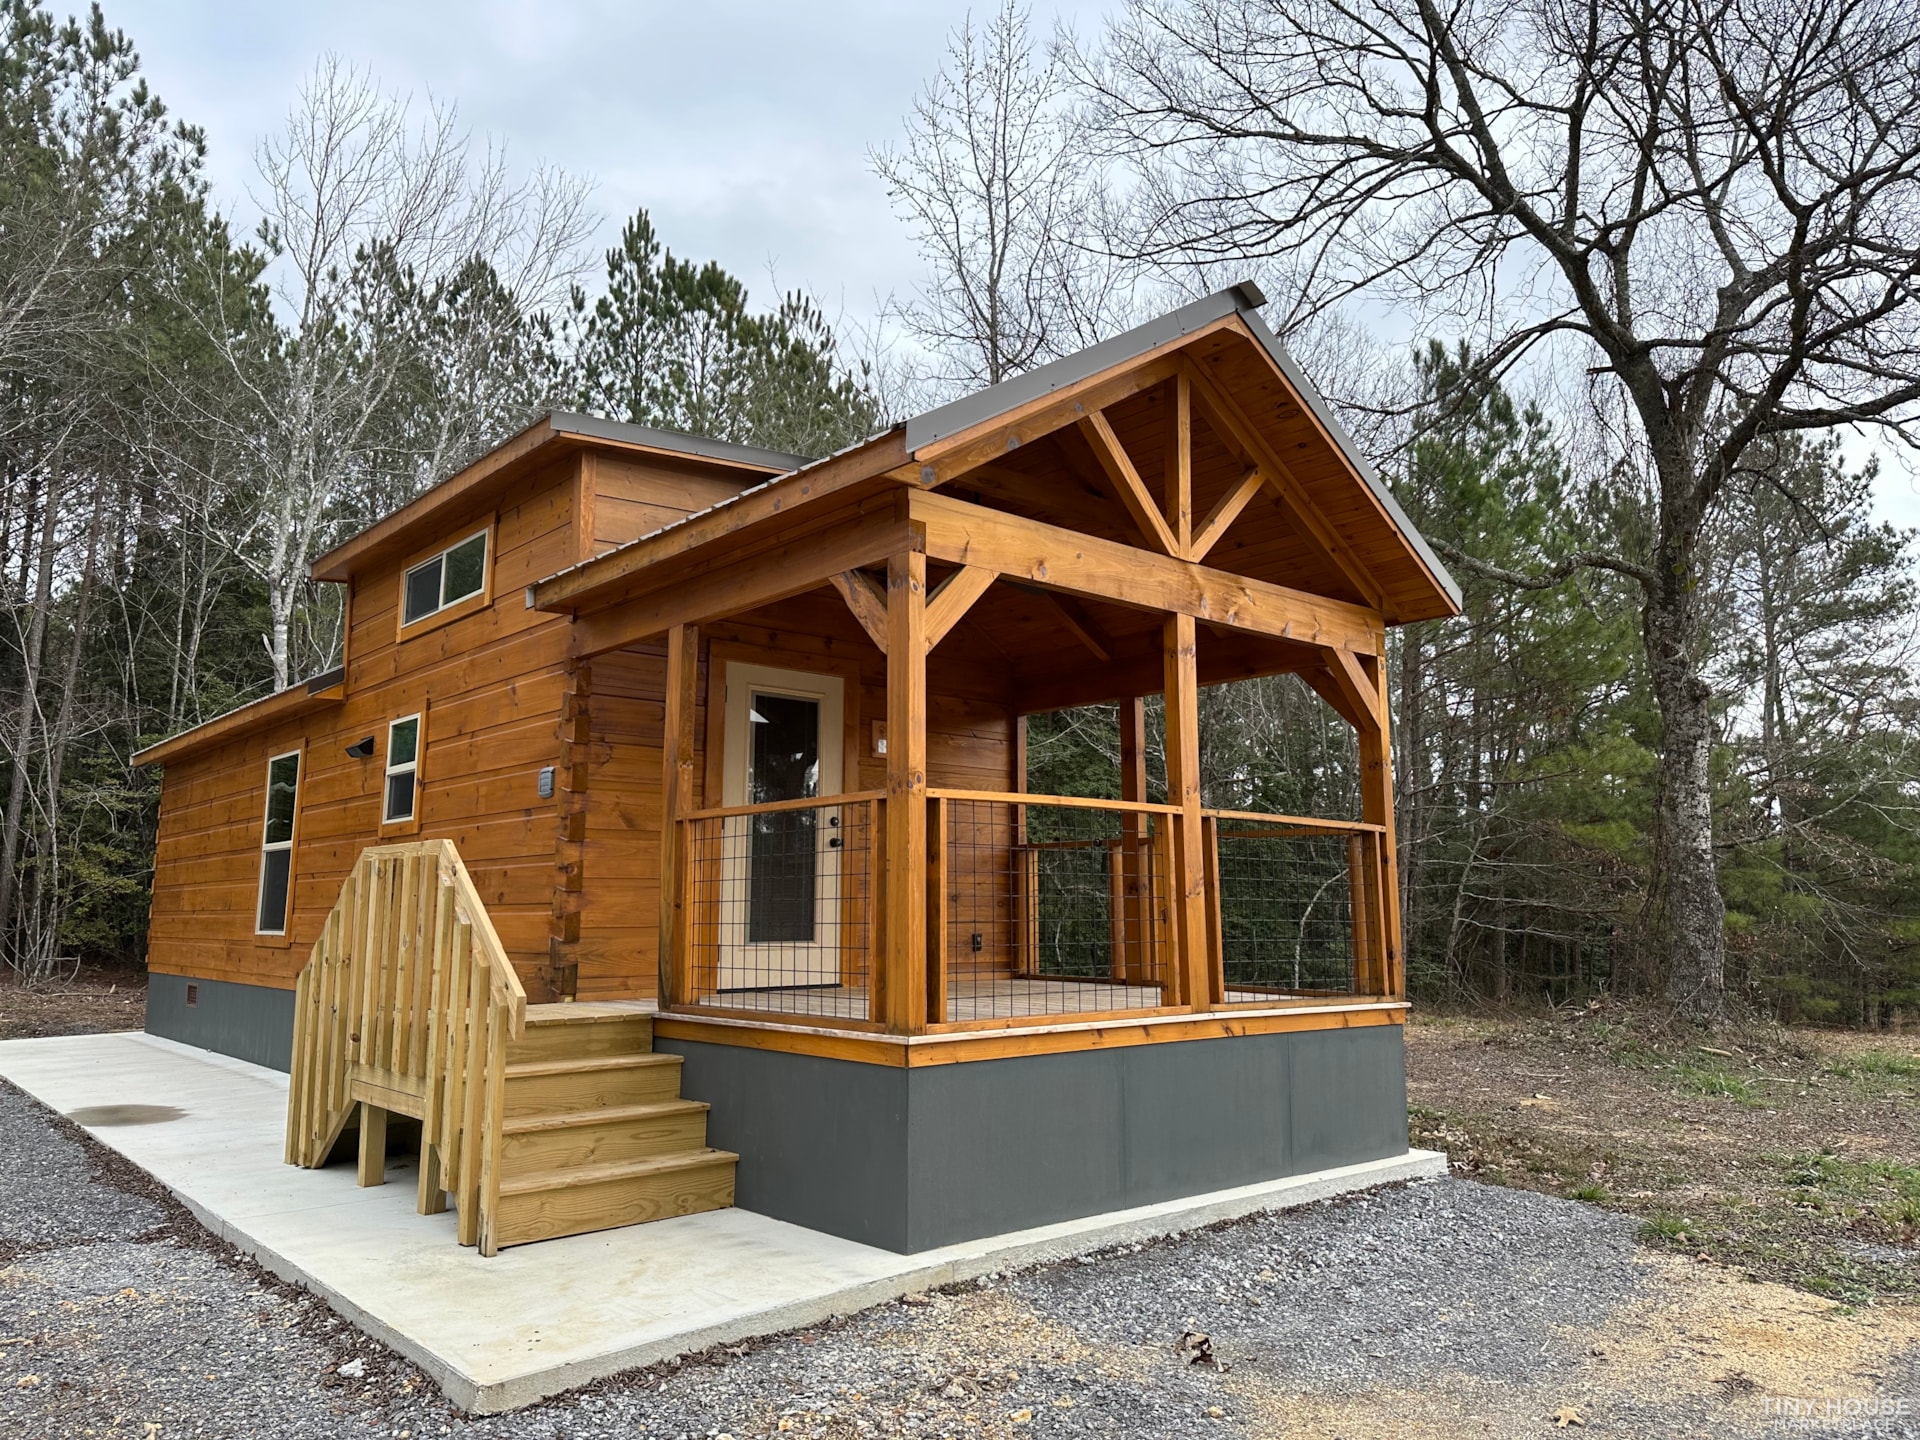 https://images.tinyhomebuilders.com/images/marketplaceimages/new-build-luxury-log-cabin-tiny-N10K0O2M56-01.jpg